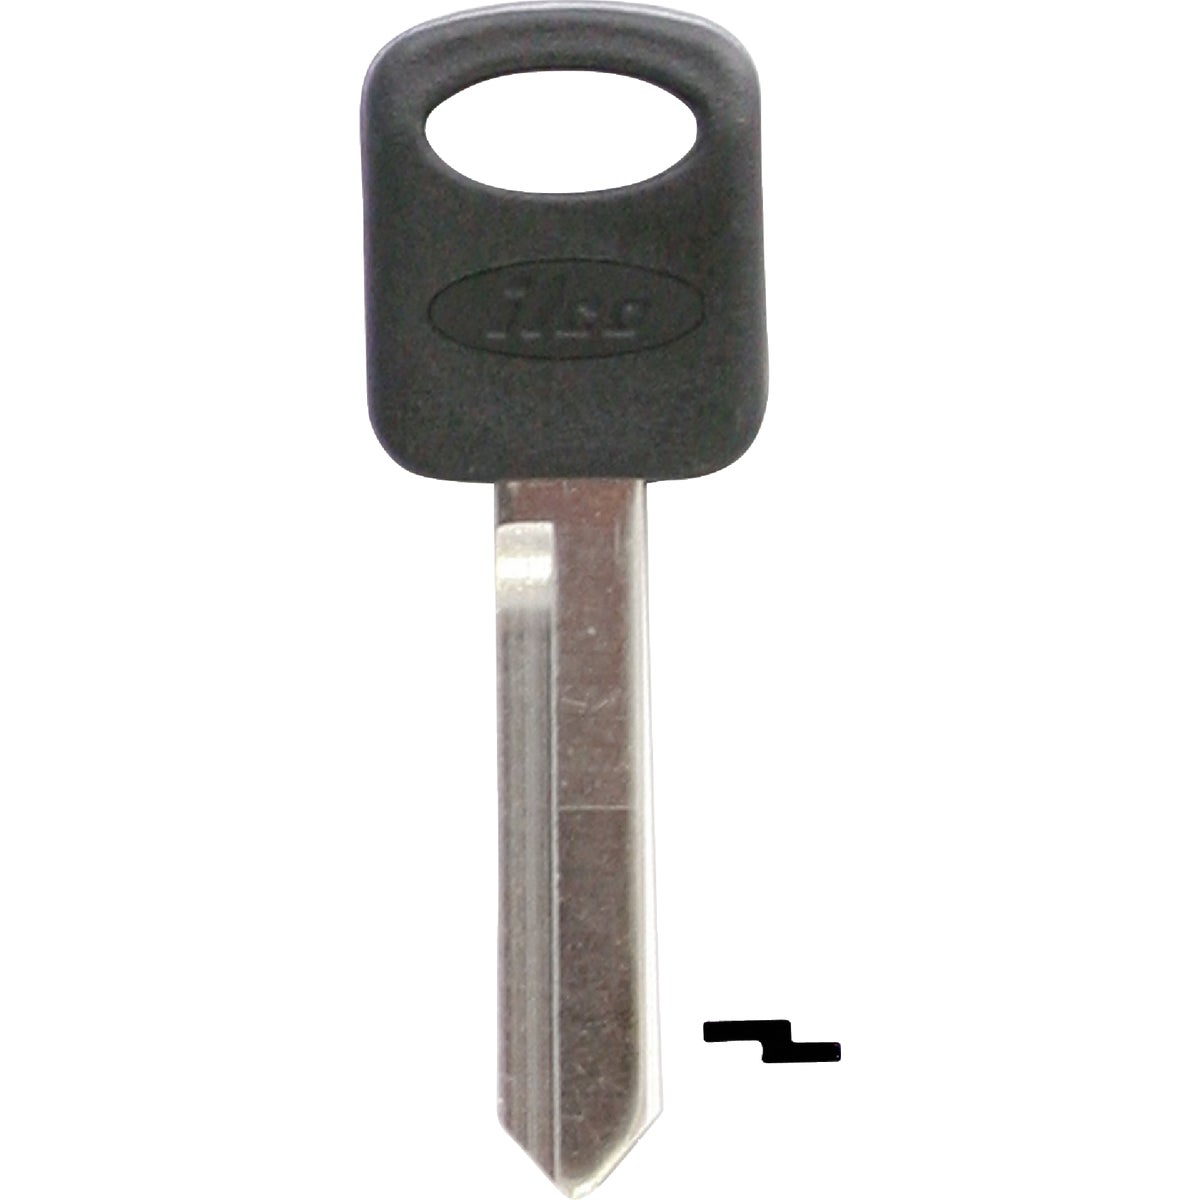 ILCO Ford Nickel Plated Automotive Key, H67-P / H67P (5-Pack)